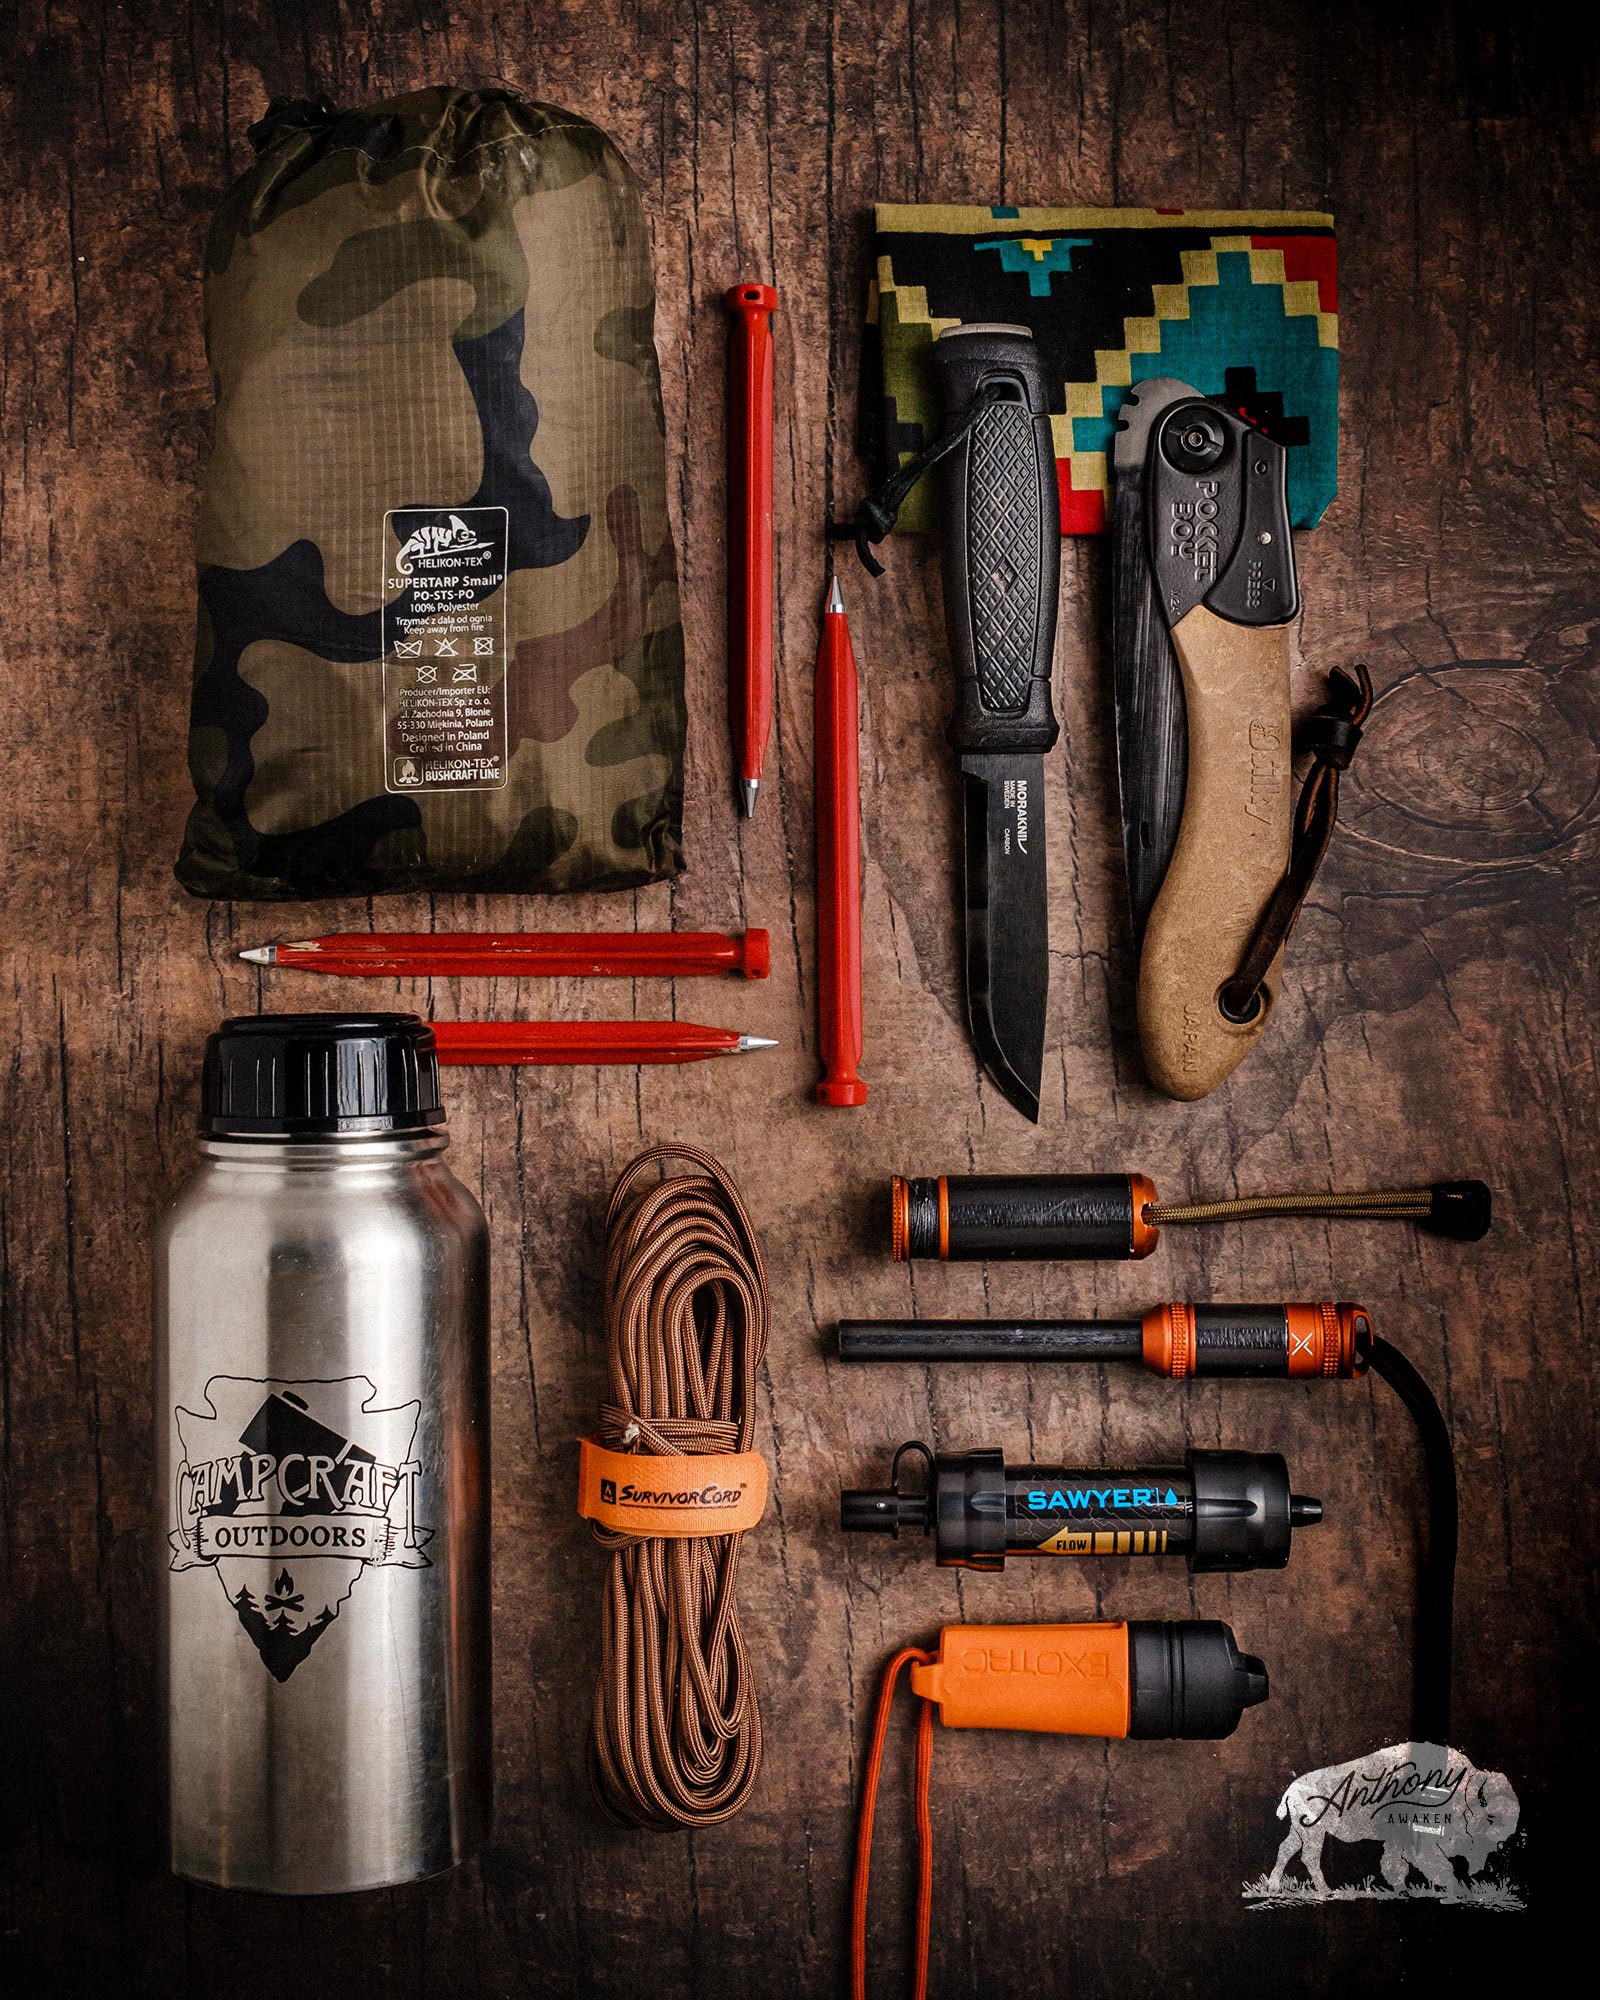 Bushcraft Tools,Camping and Outdoor Backpacking Gear,Survival